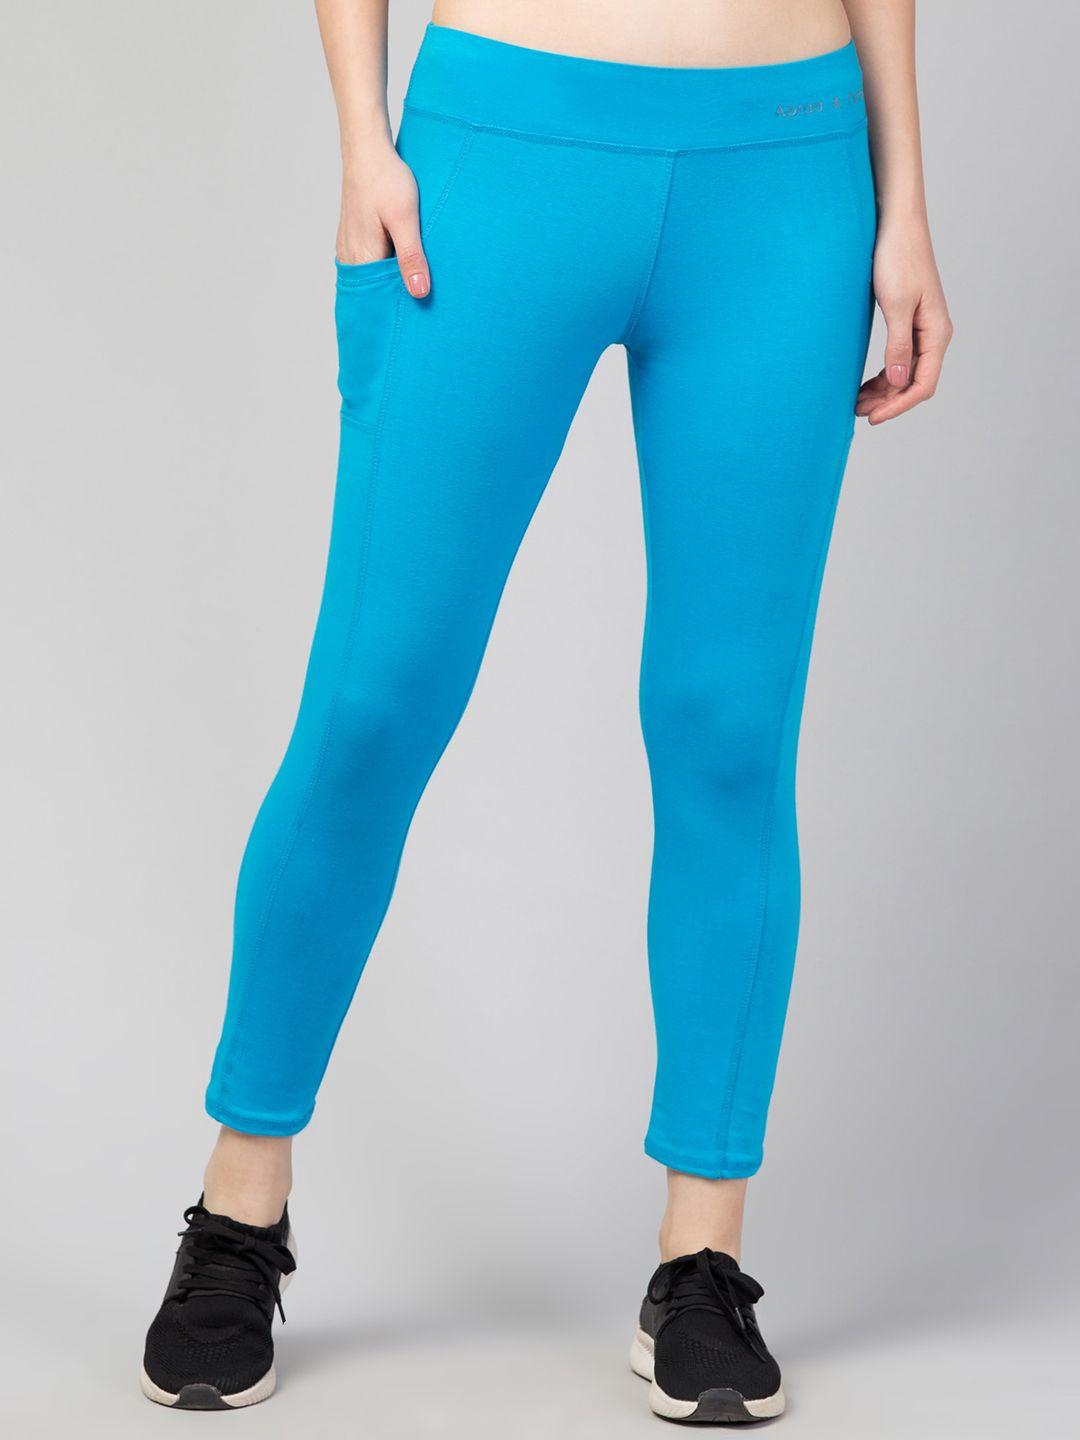 apraa & parma women tights with pockets